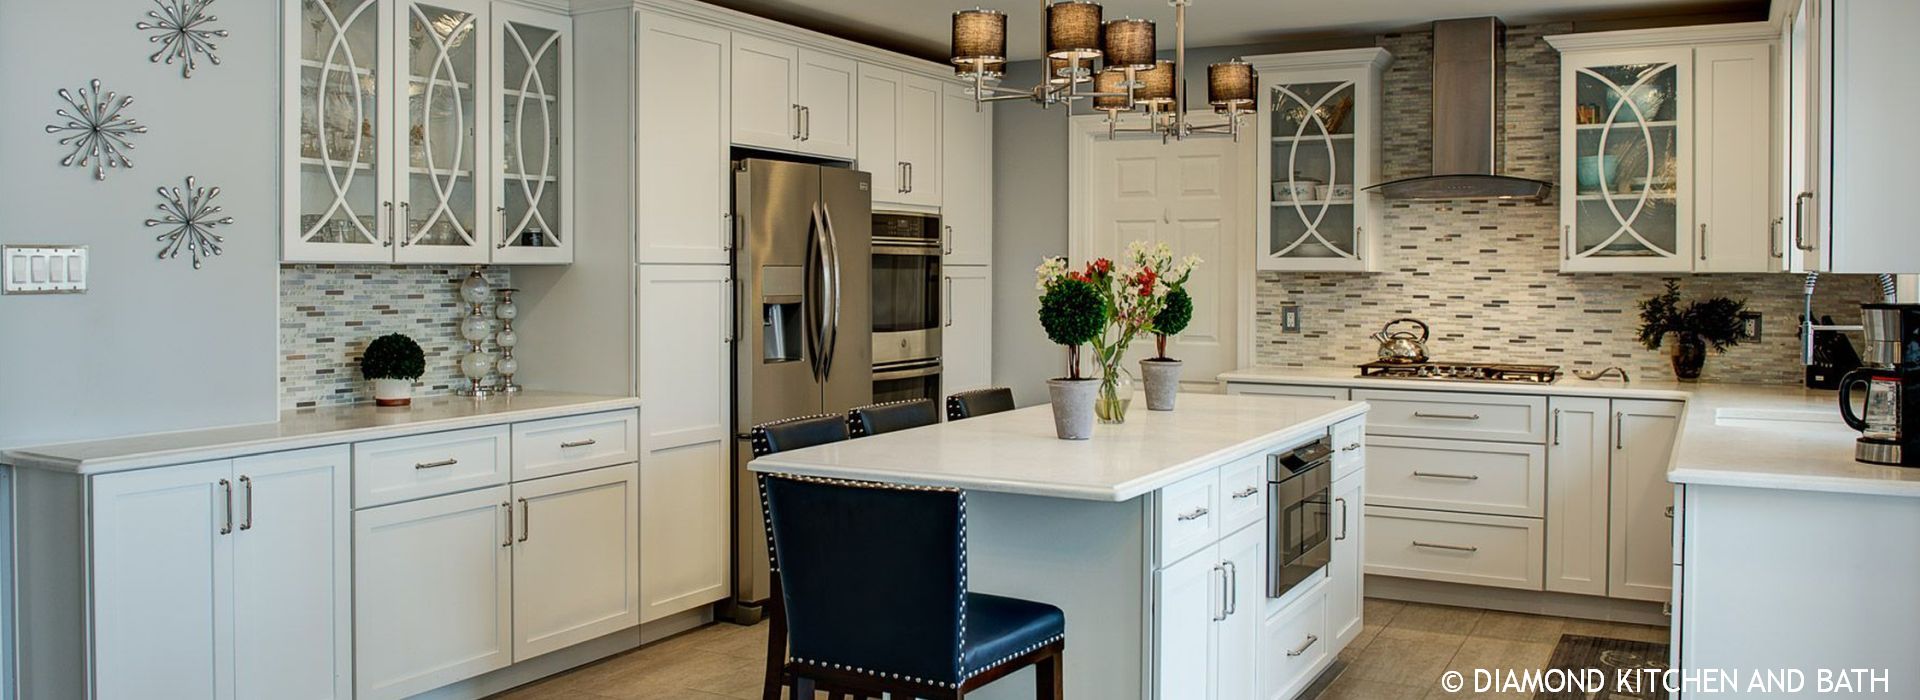 DIAMOND KITCHEN AND BATH - YOUR DEPENDABLE REMODELING COMPANY